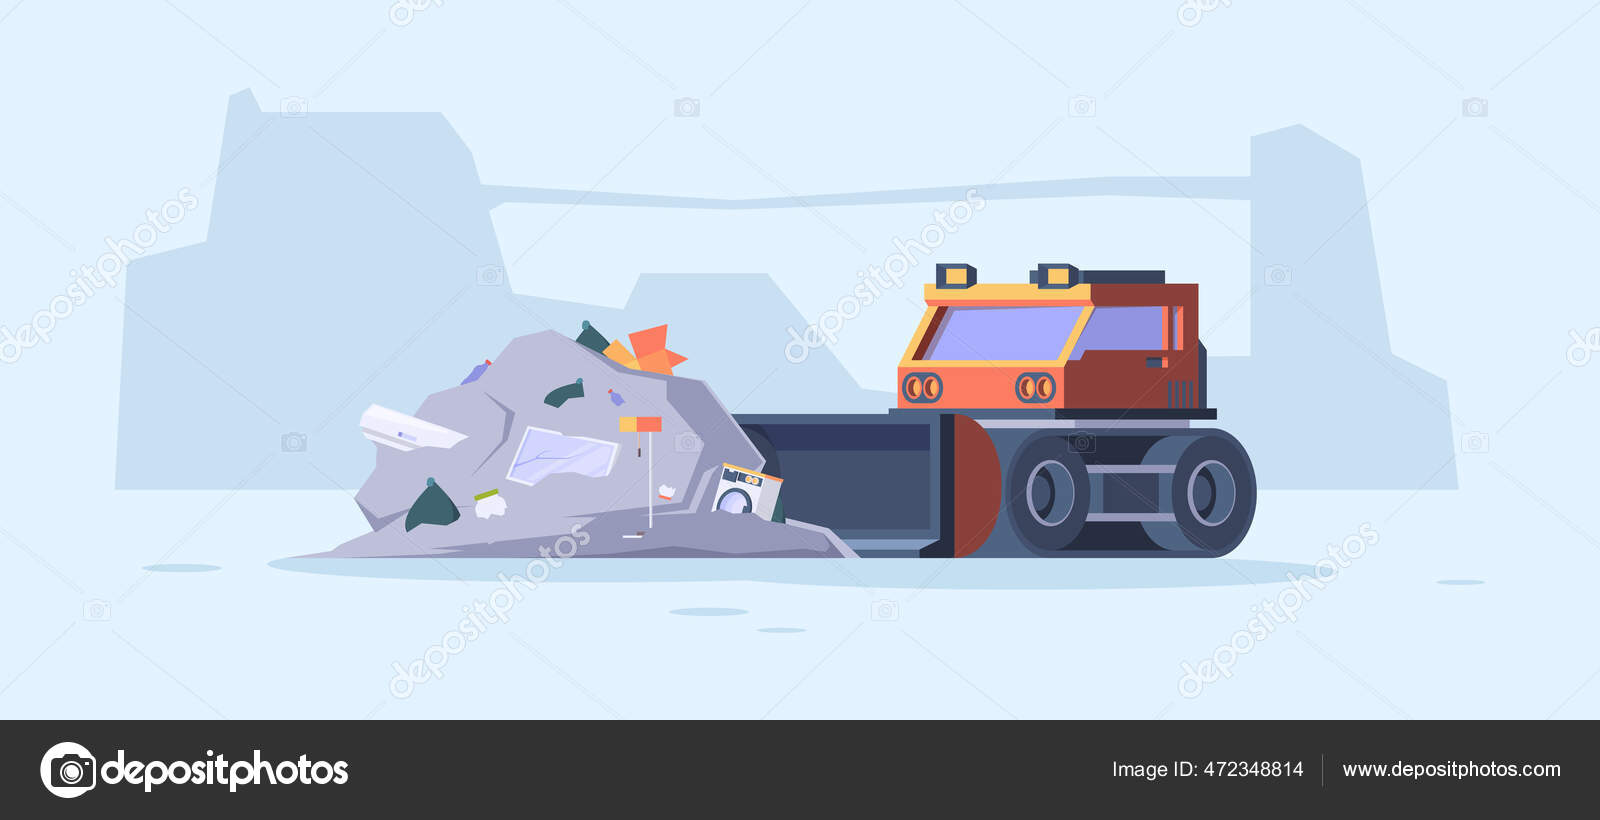 Remove garbage street. Urban cleaning service waste recycling processes bulldozer remove trash garish vector cartoon background save nature Vector Image by #472348814